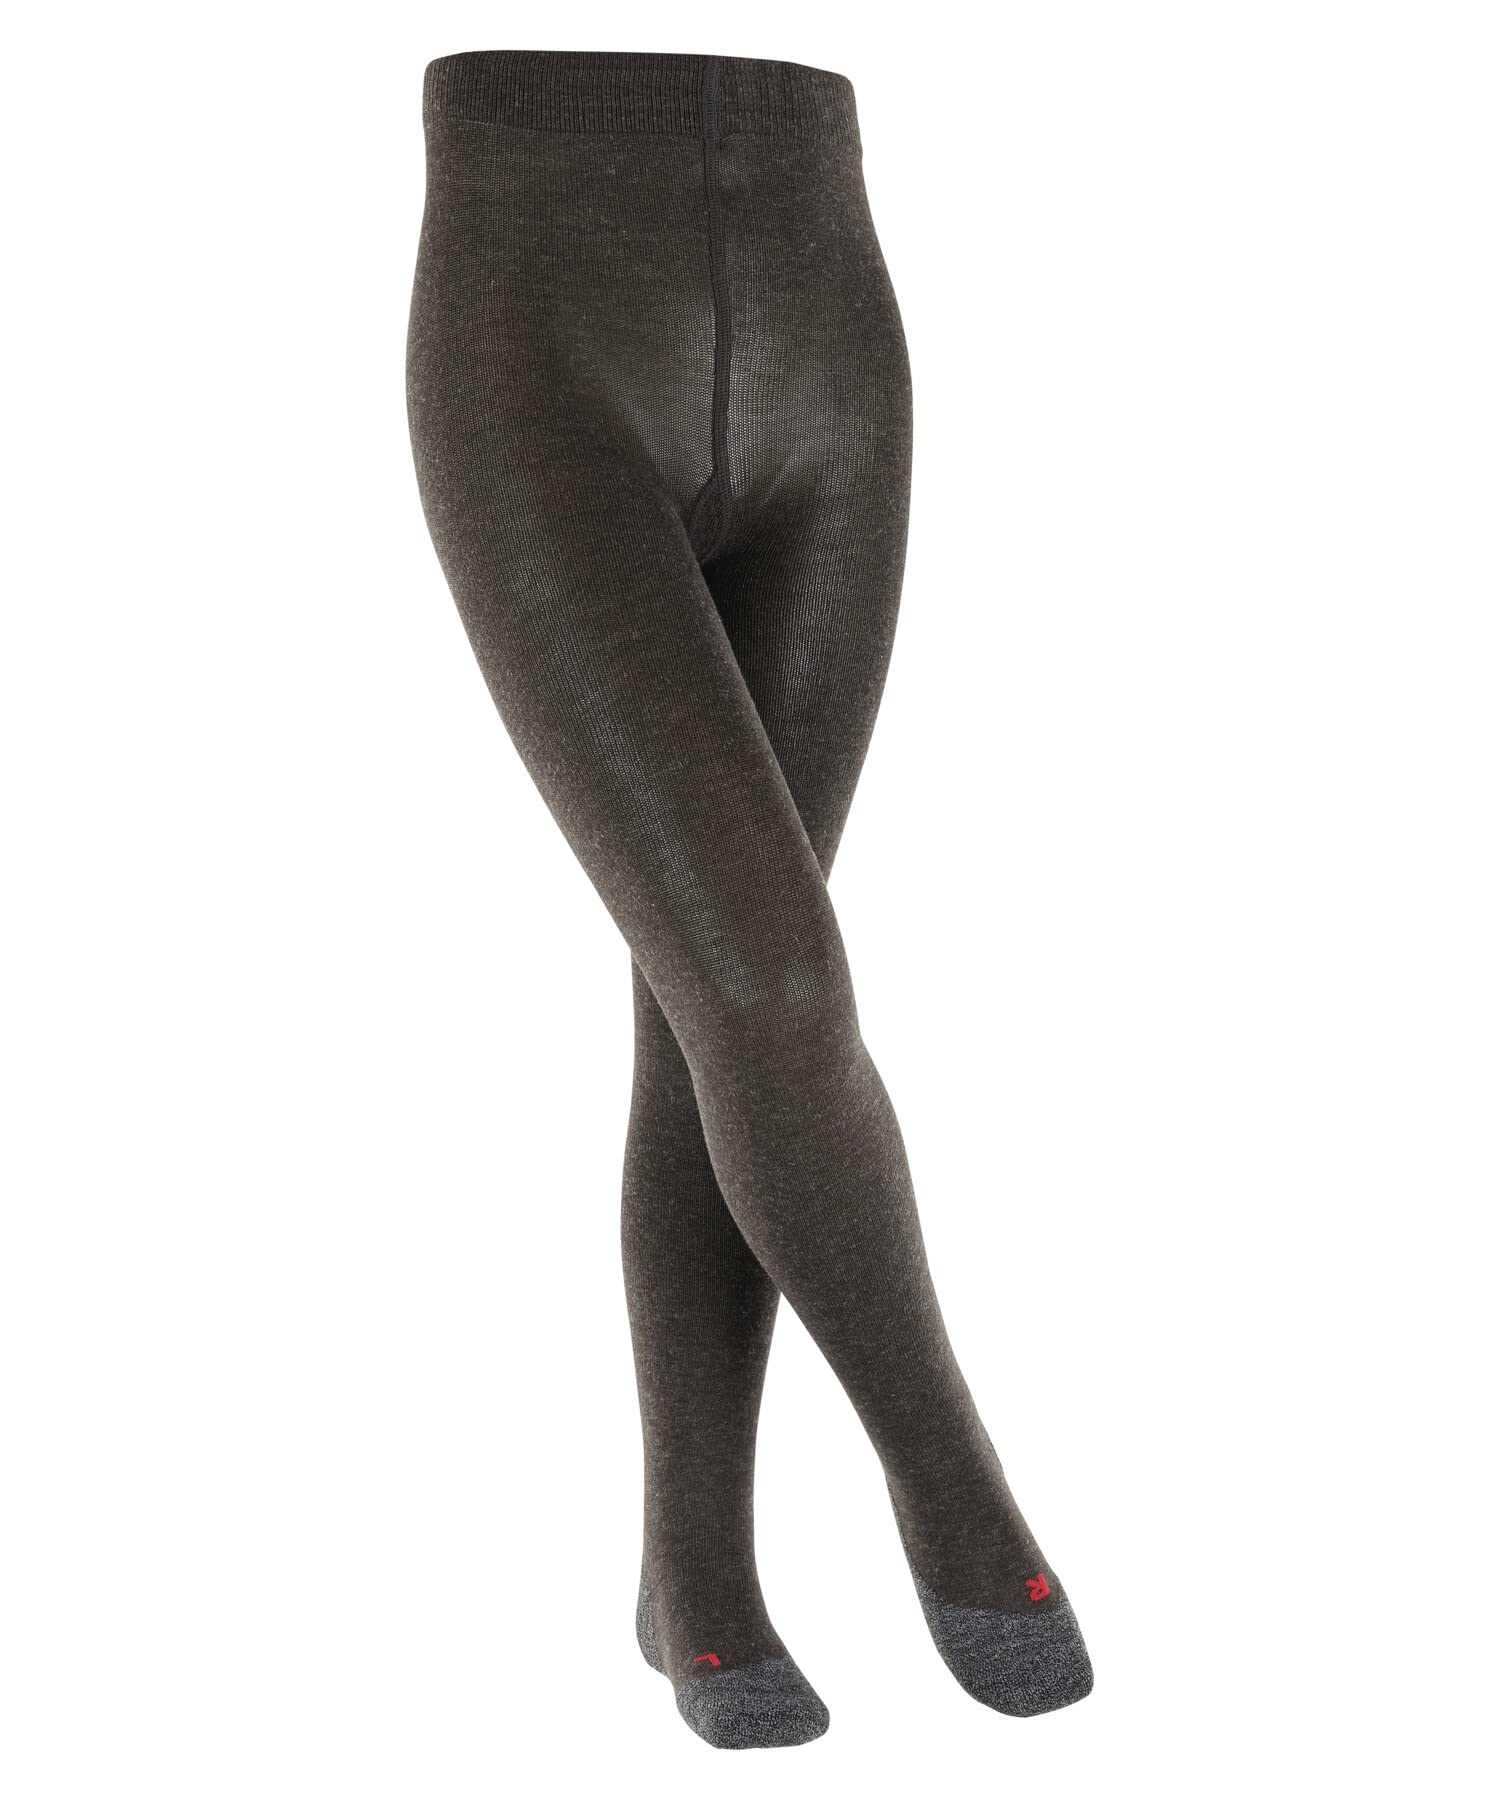 FALKE Girls Active Warm Tights - Merino Wool Blend, In Black or Grey, Sizes 1 to 16 years, 1 Pair